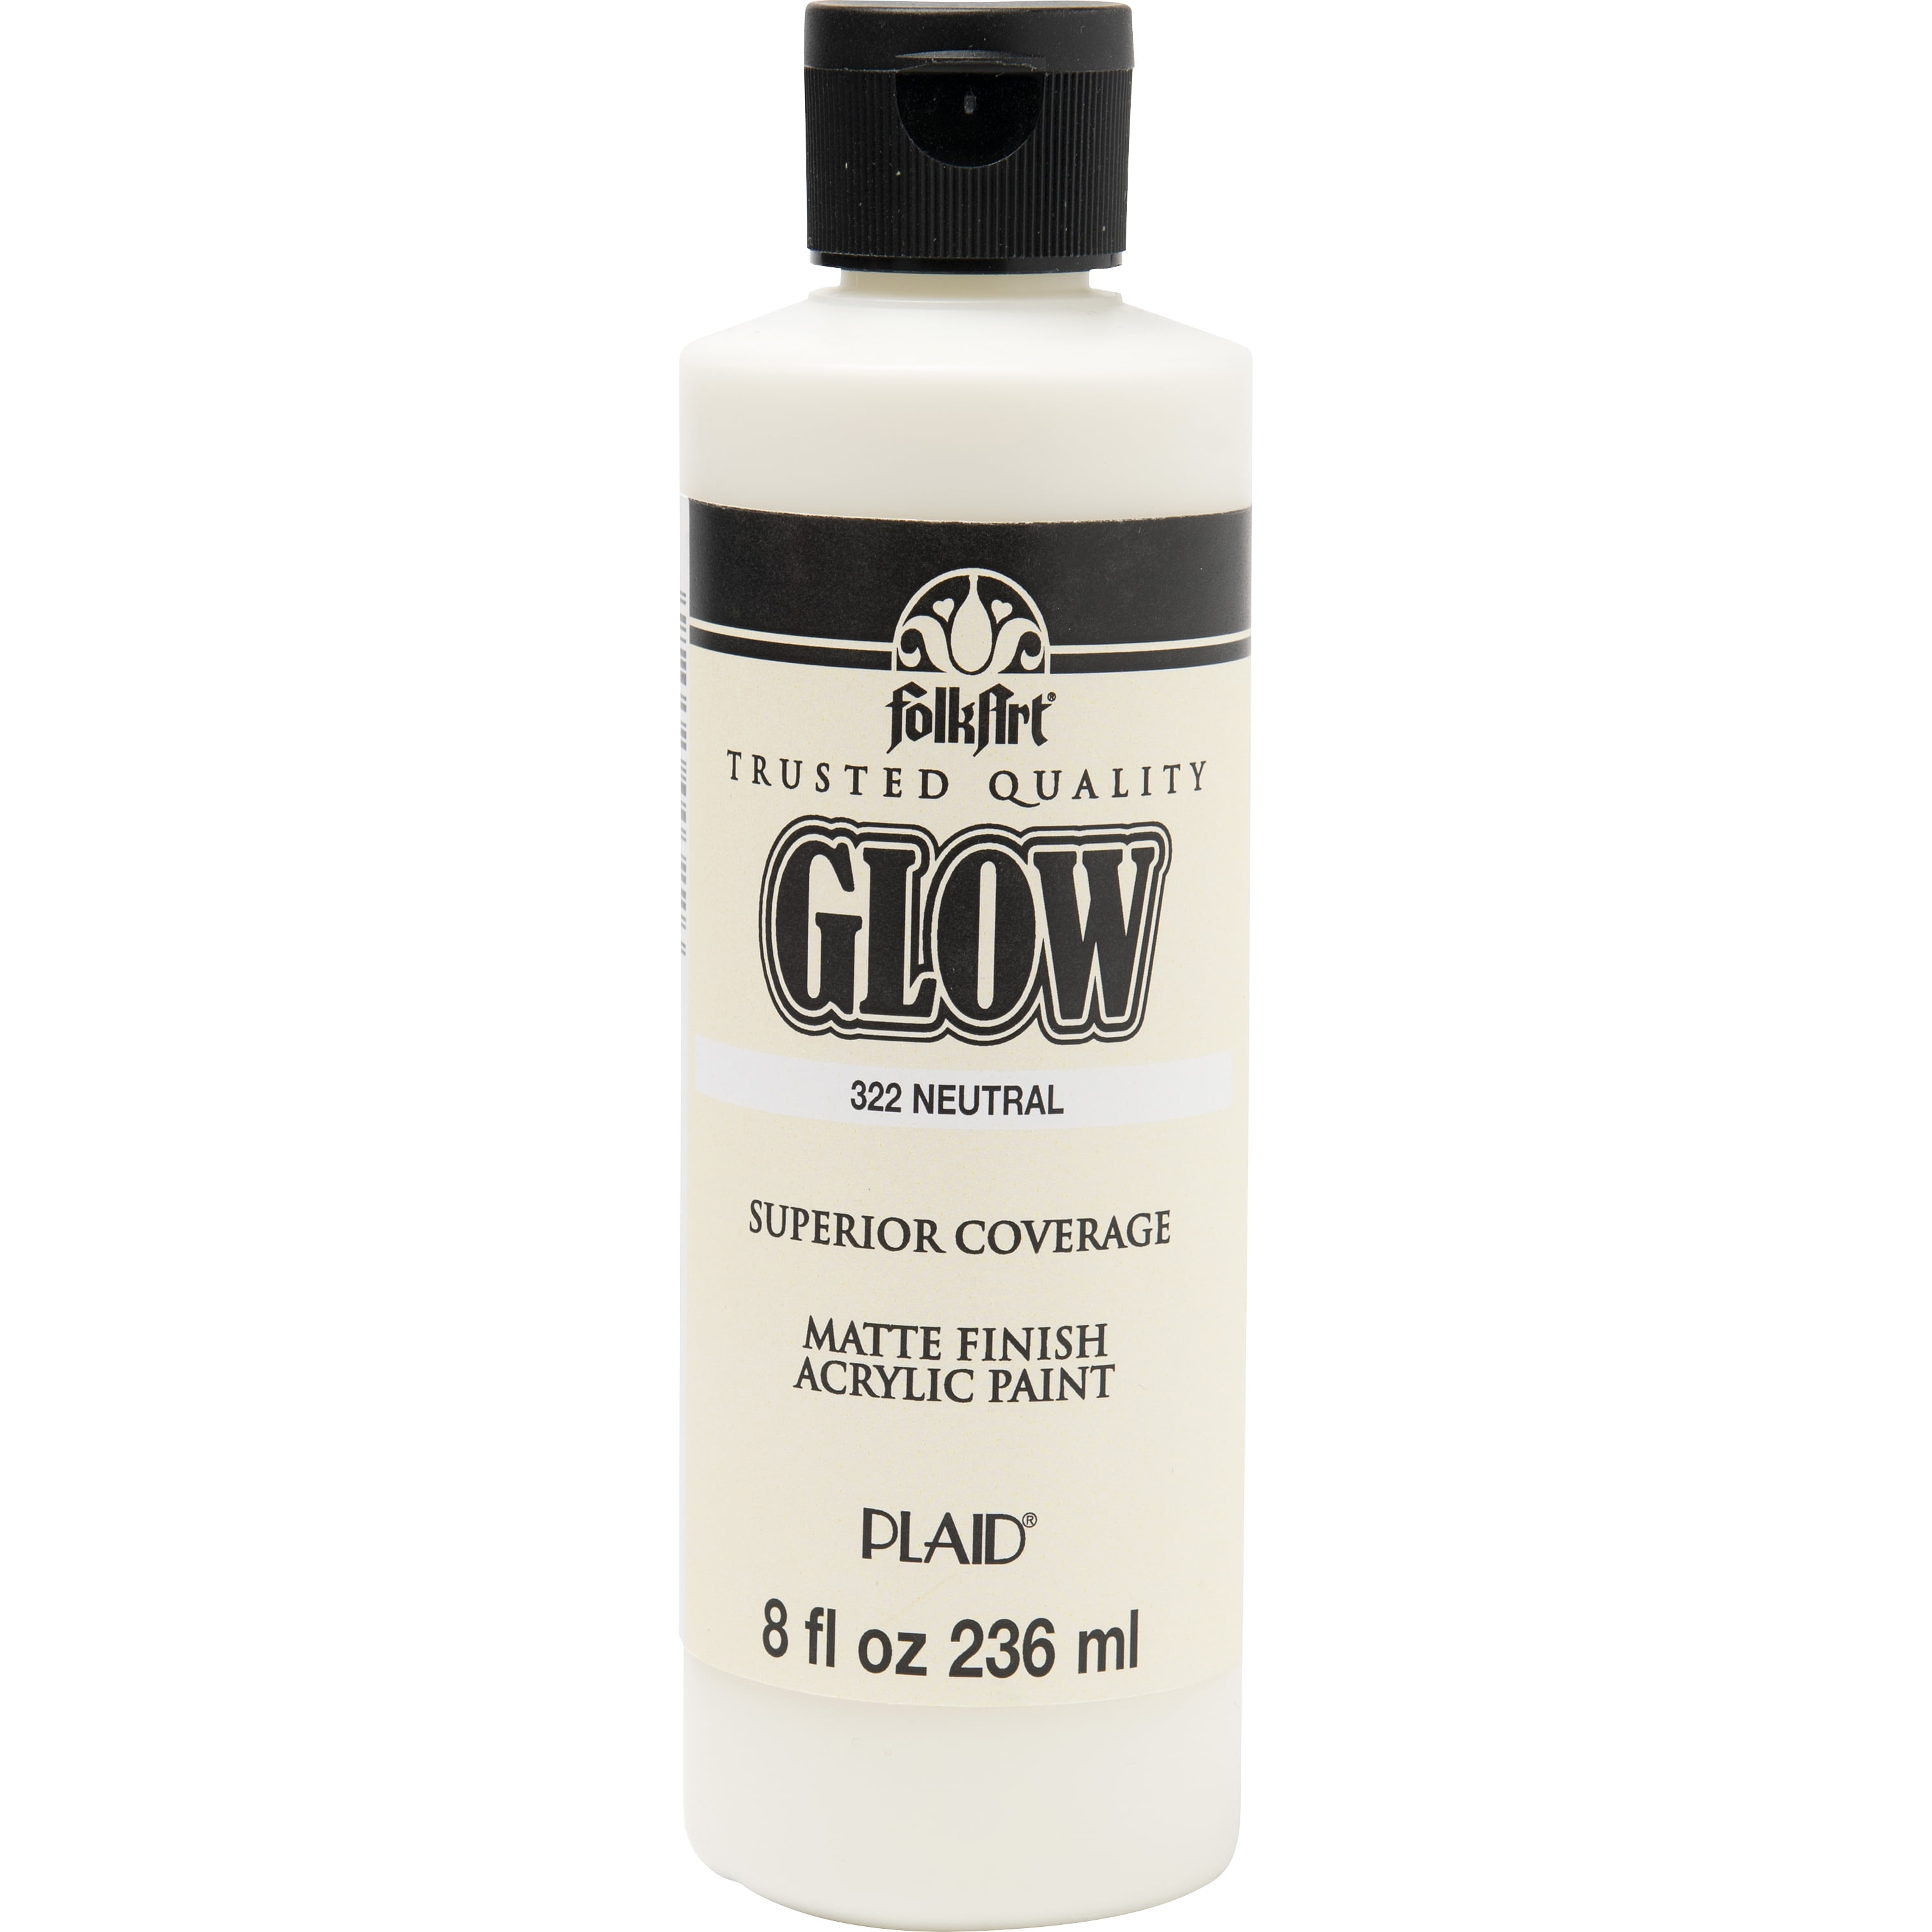 Glow in The Dark Paint Premium Artists Acrylic 1 Ounce Neutral Green